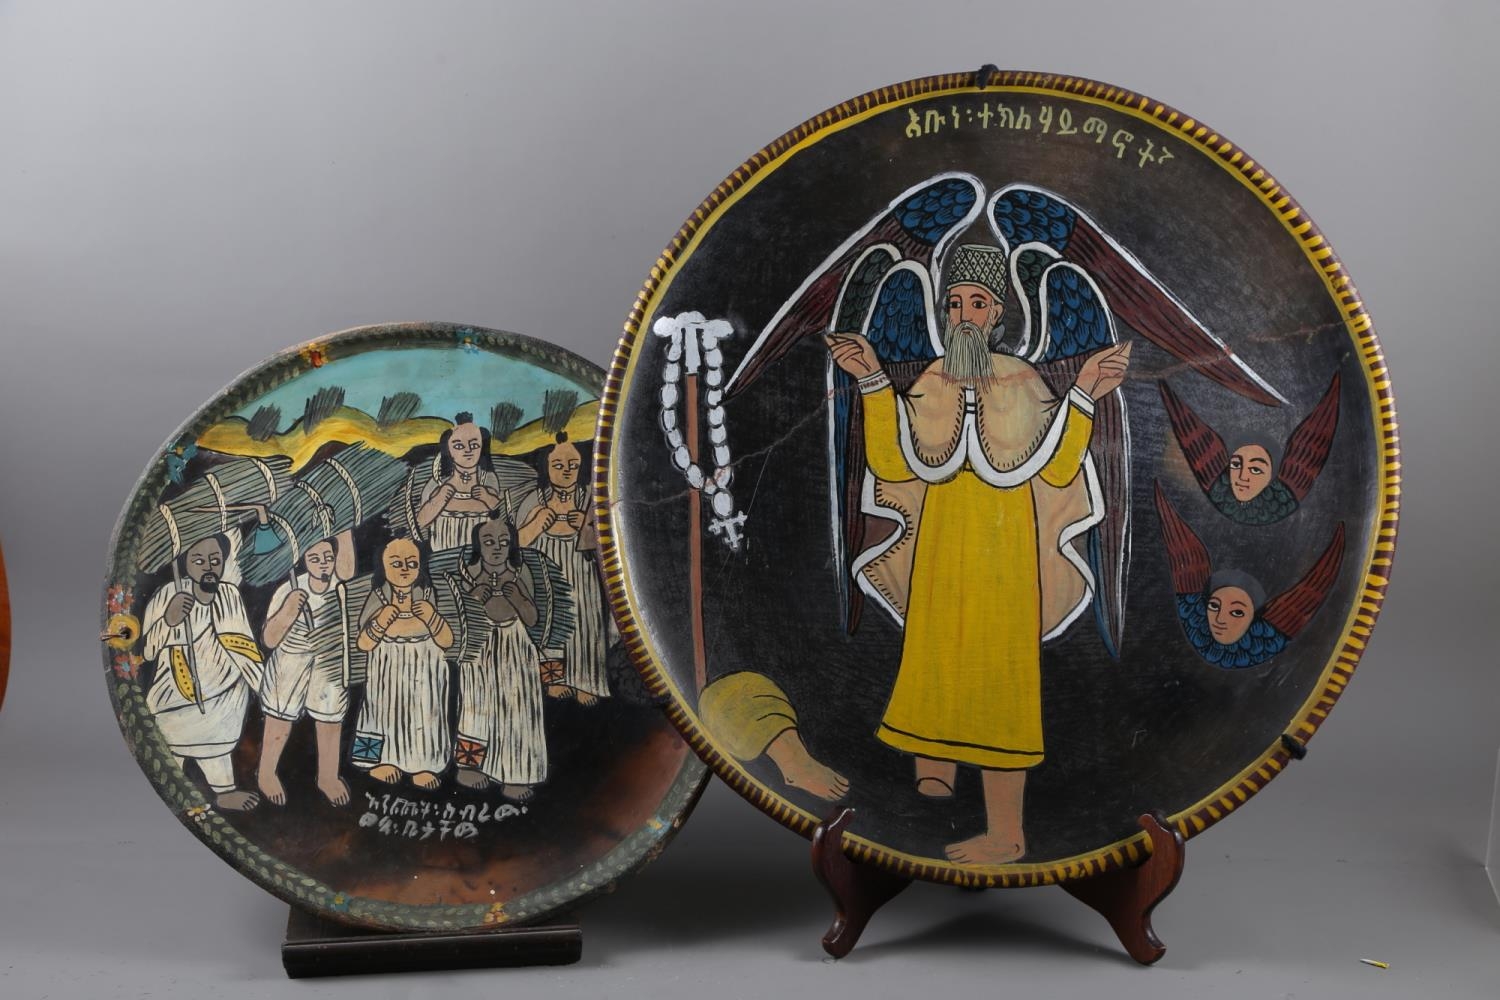 A Coptic/Ethiopian figure decorated charger, 18" dia, and a Coptic/Ethiopian Saint decorated